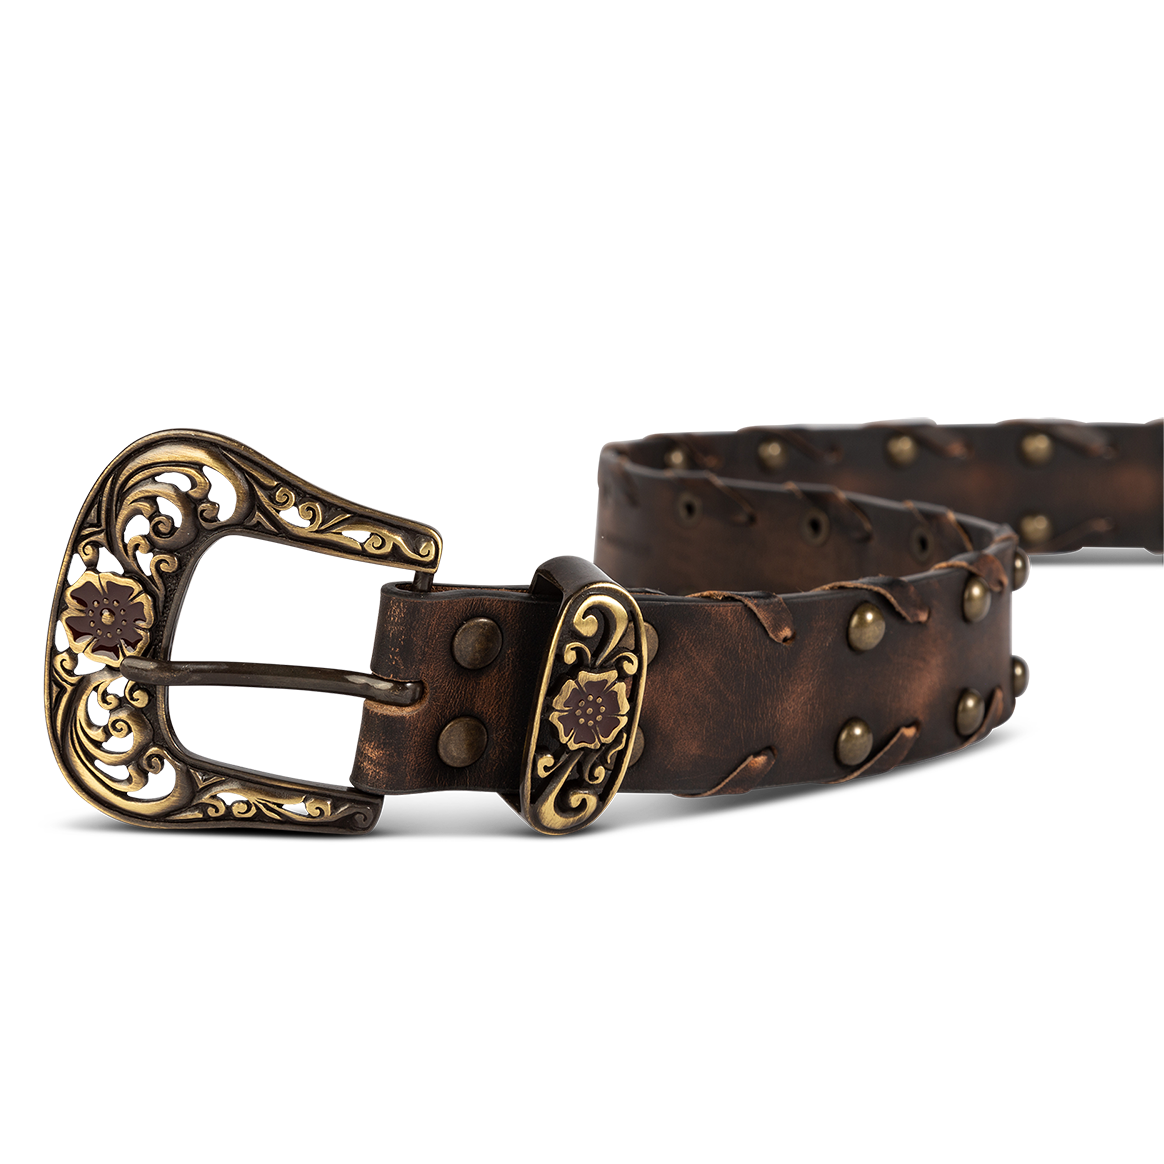 Whip black front view featuring single buckle closure, embroidered detailing and stud embellishments on FREEBIRD full grain leather belt